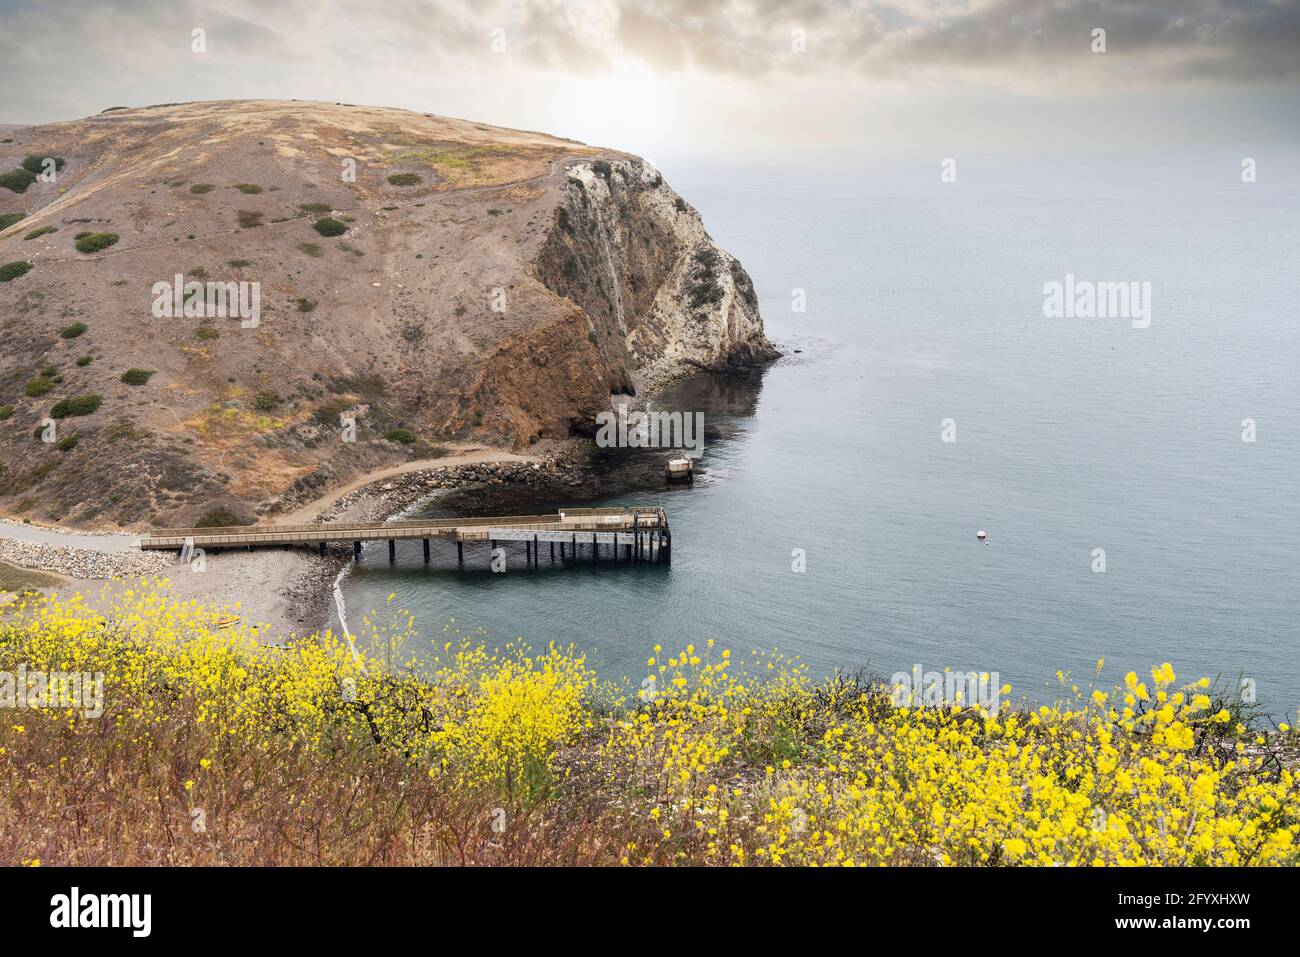 View towards the dock at Scorpion Anchorage on Santa Cruz Island in the Channel Islands National Park near Los Angeles and Ventura, California, USA. Stock Photo